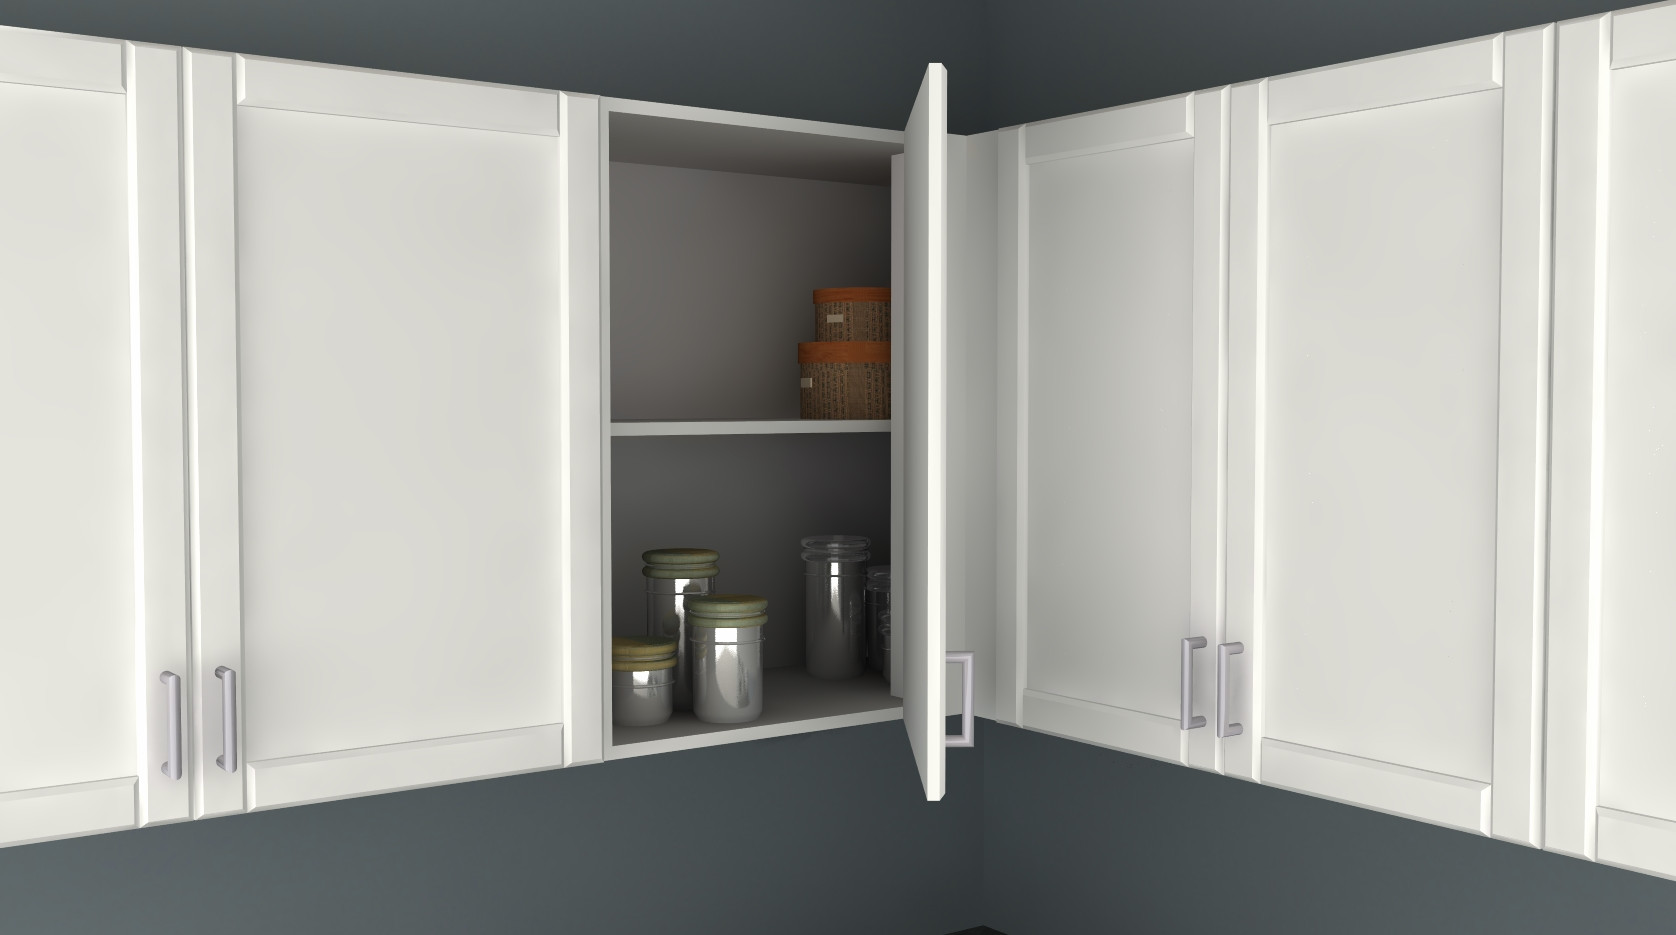 Corner Wall Kitchen Cabinet
 IKEA Kitchen Hack A Blind Corner Wall Cabinet Perfect for